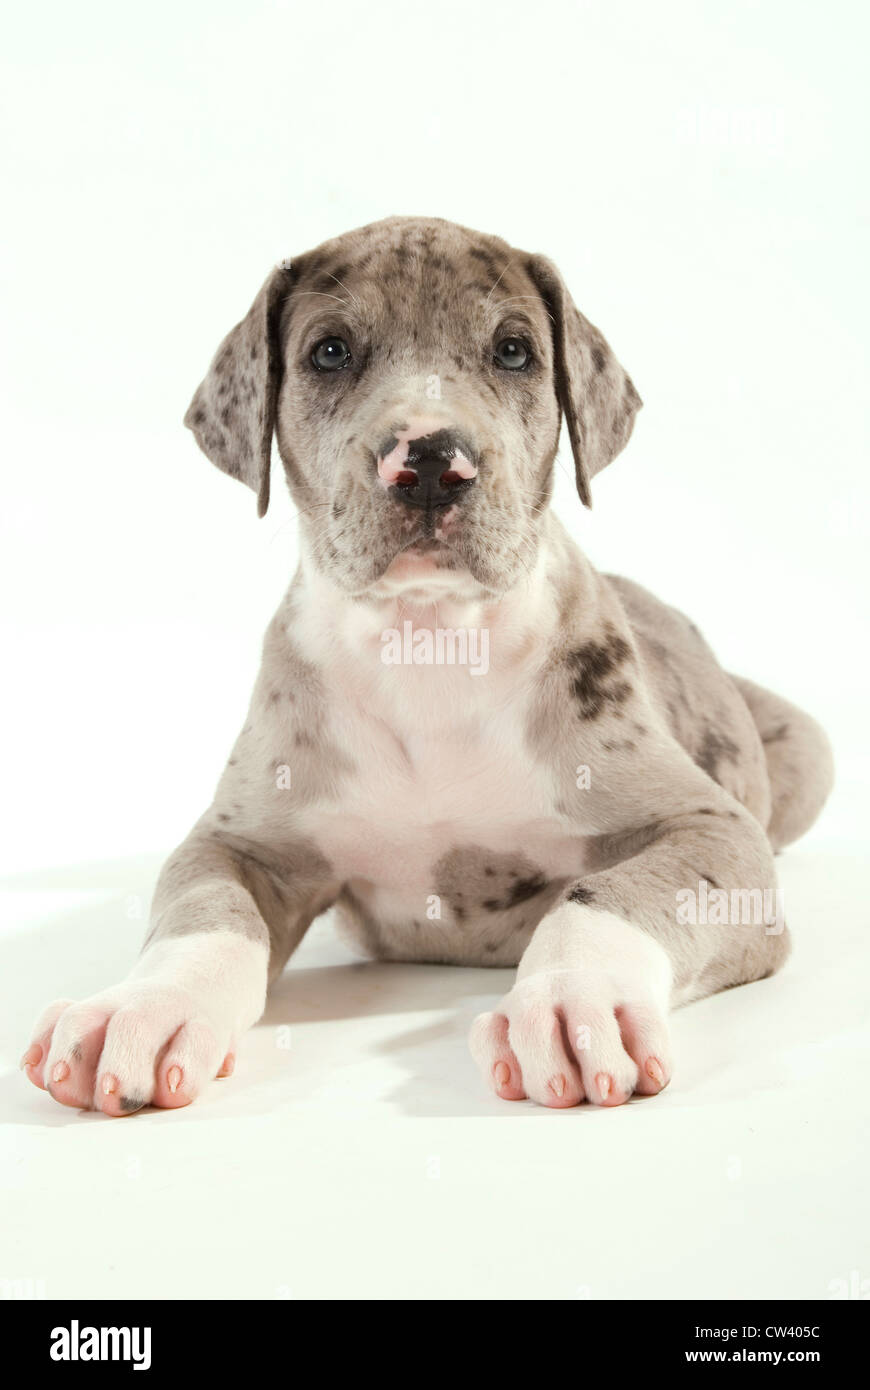 Great Dane. Puppy lying. Studio picture against a white background Stock Photo